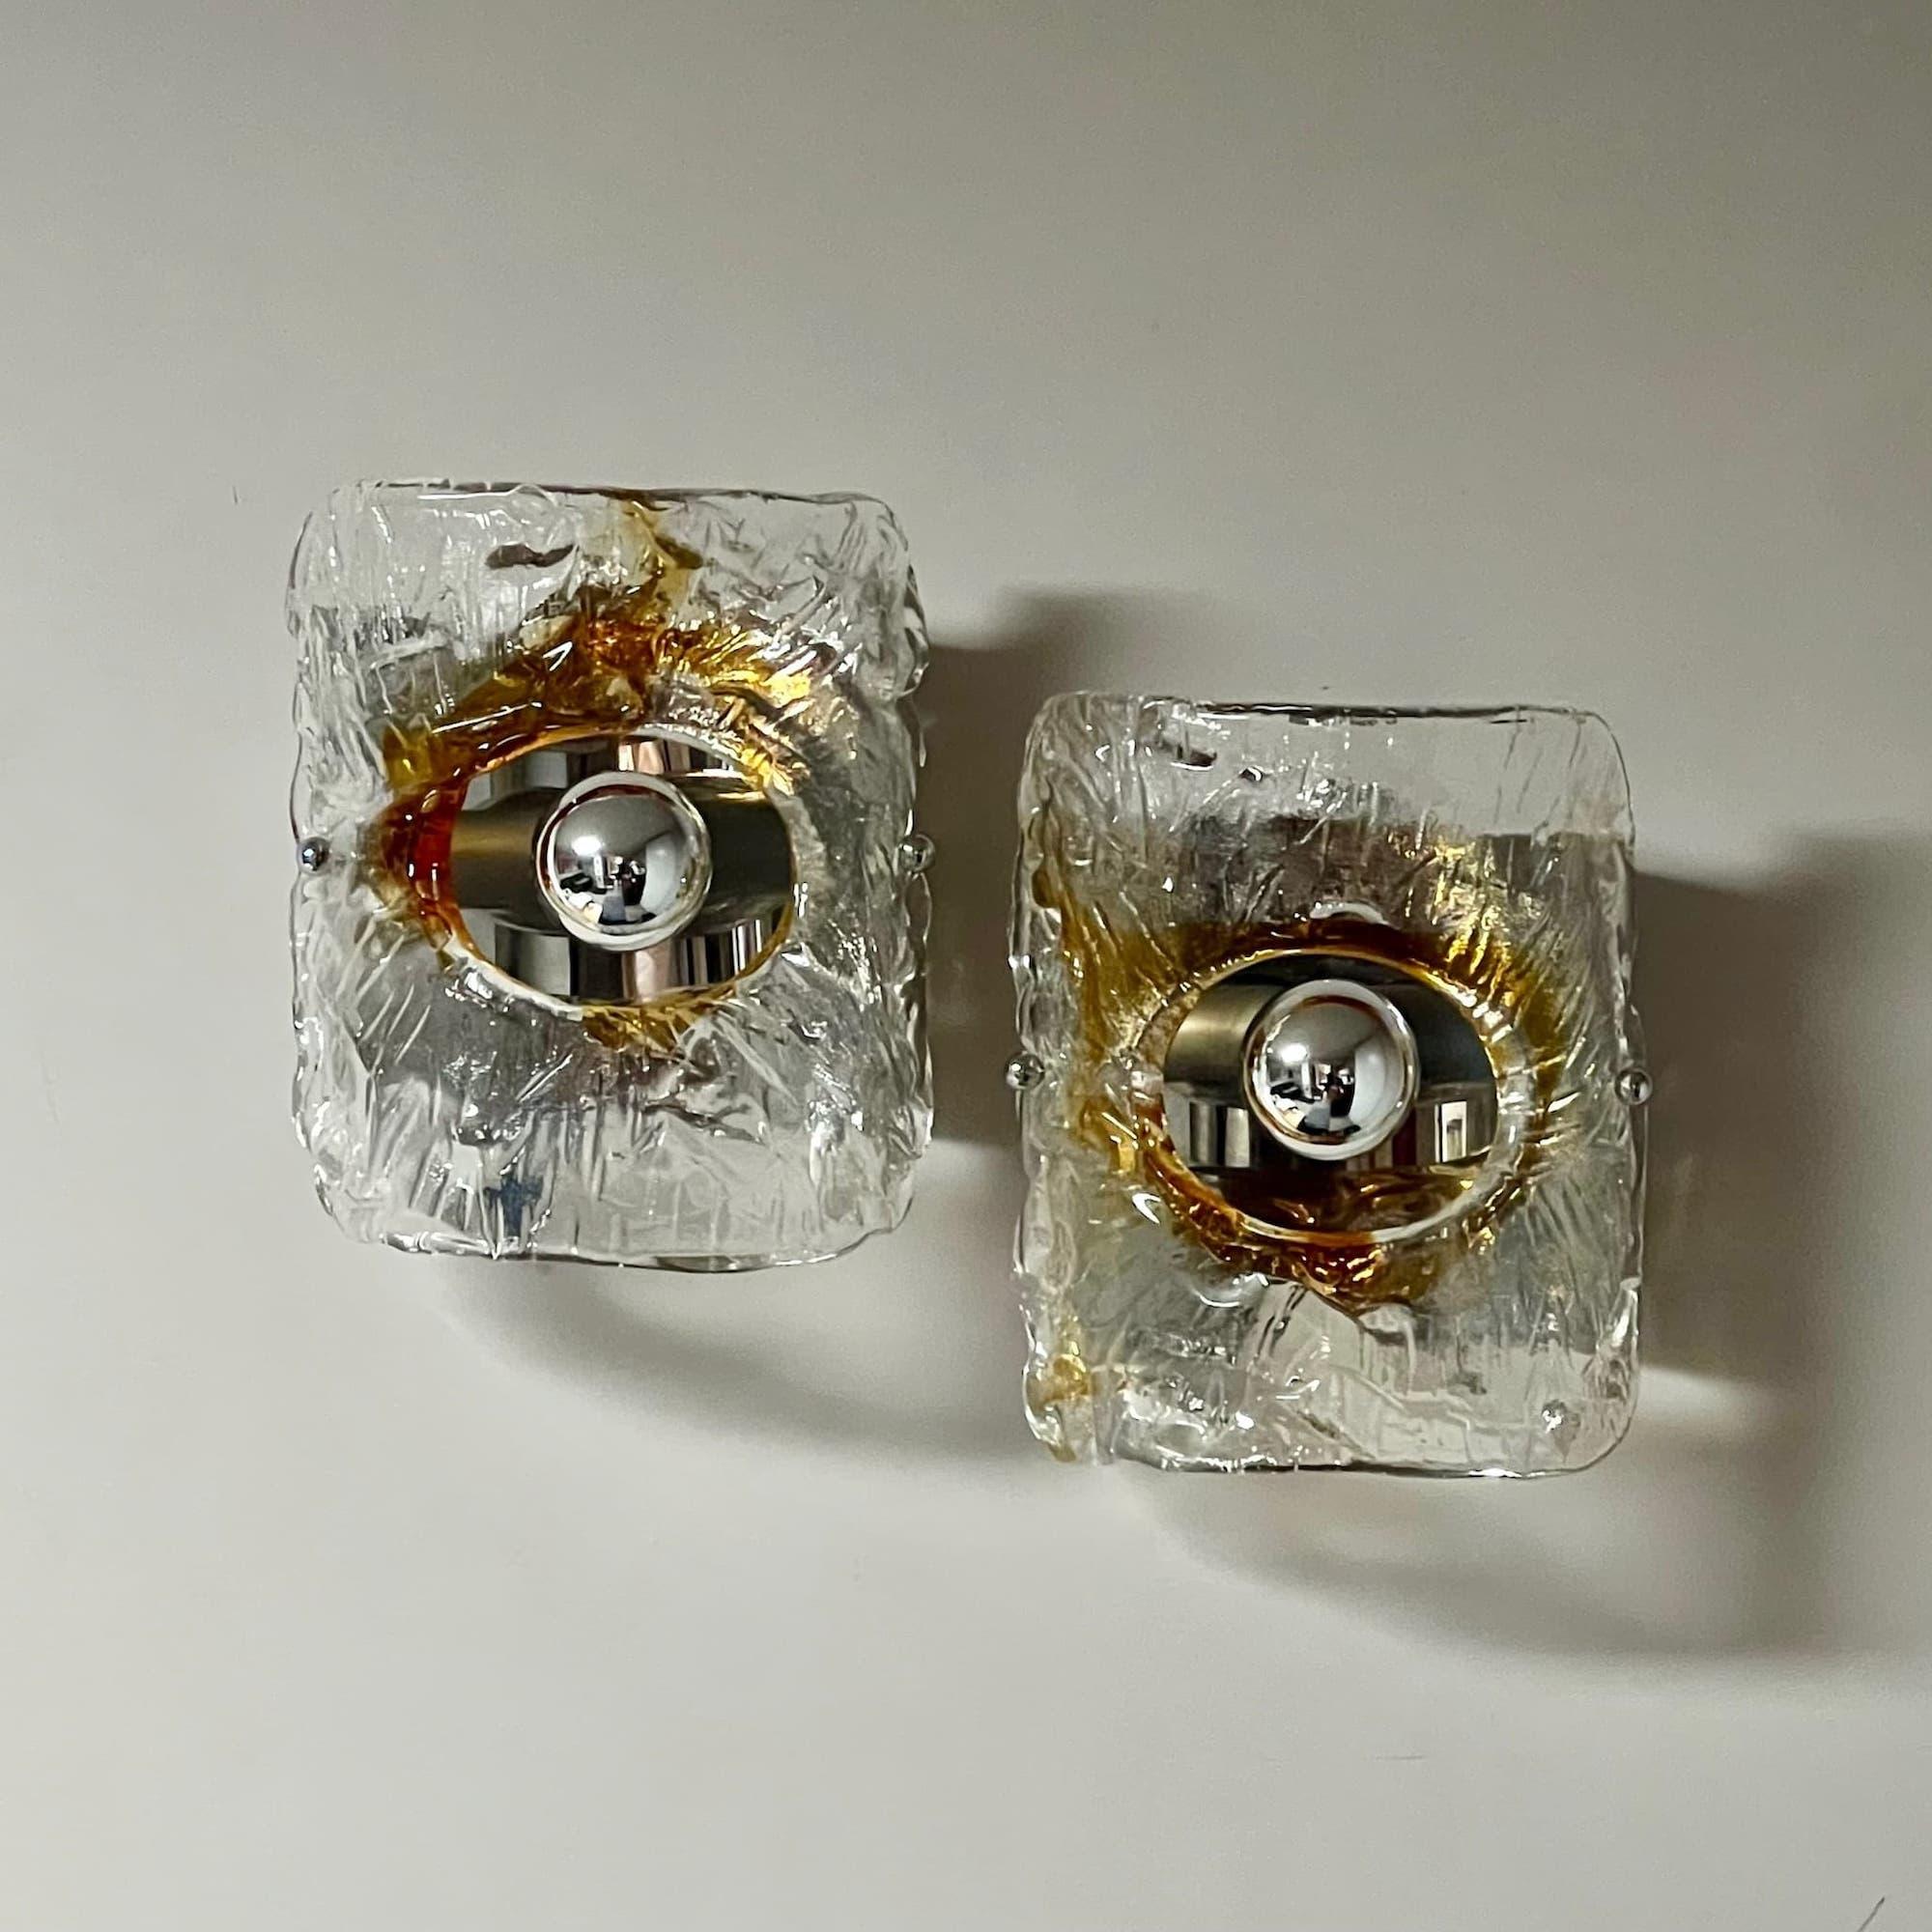 Transport yourself to the glamorous era of the Seventies with this rare pair of Vintage 70s Lamps made of Murano Glass and meticulously crafted in Italy. These exquisite wall lights embody the quintessential style of Carlo Nason designs, coupled